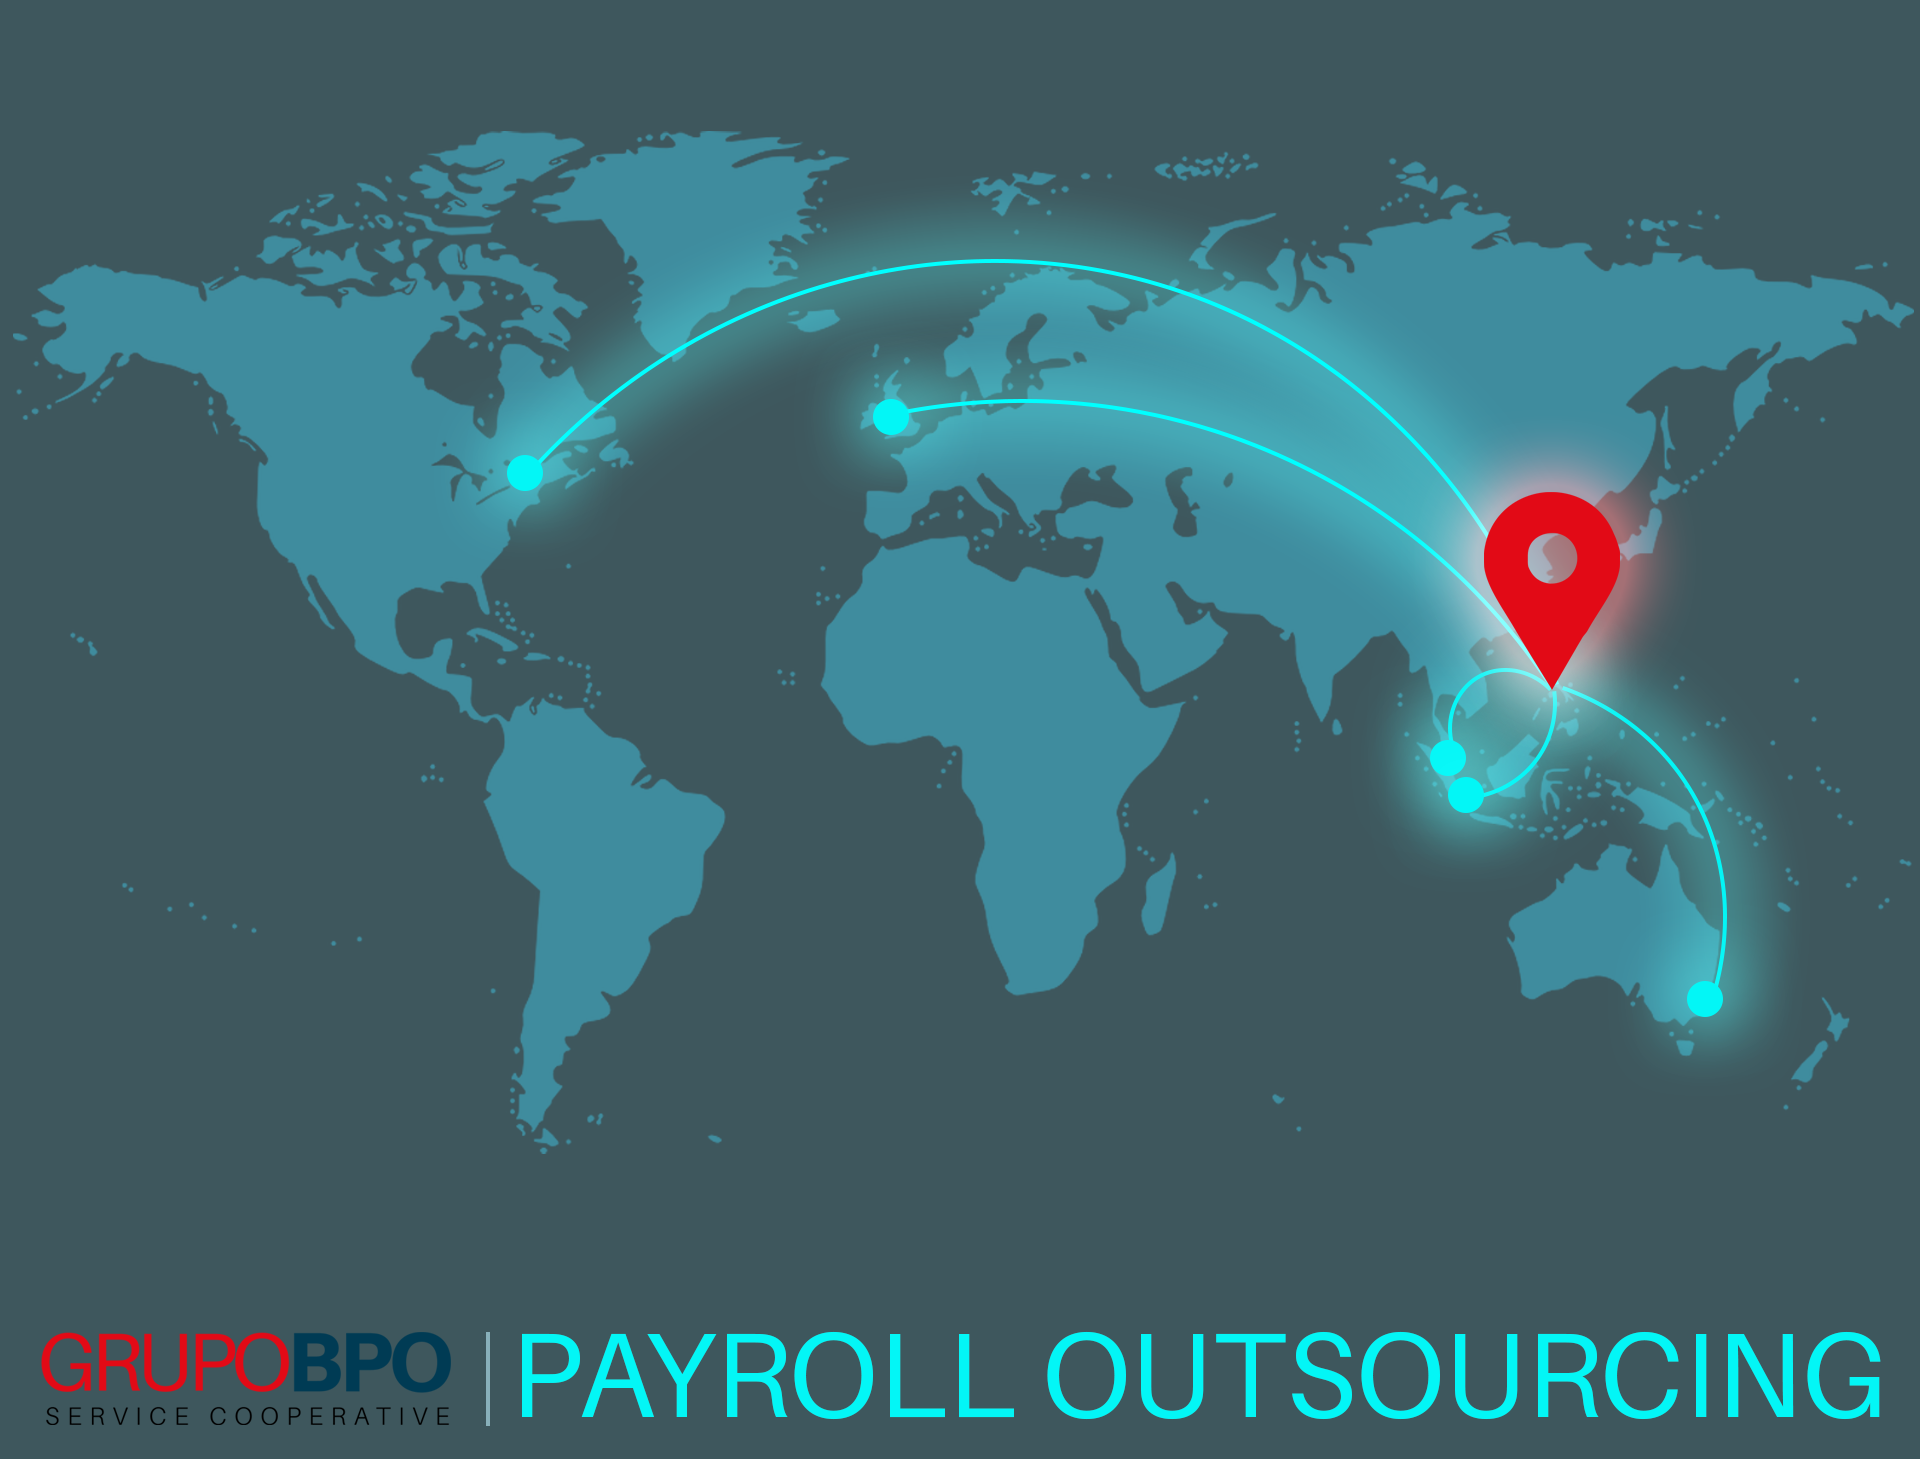 Payroll Outsourcing in the Philippines Gaining Traction from These Countries